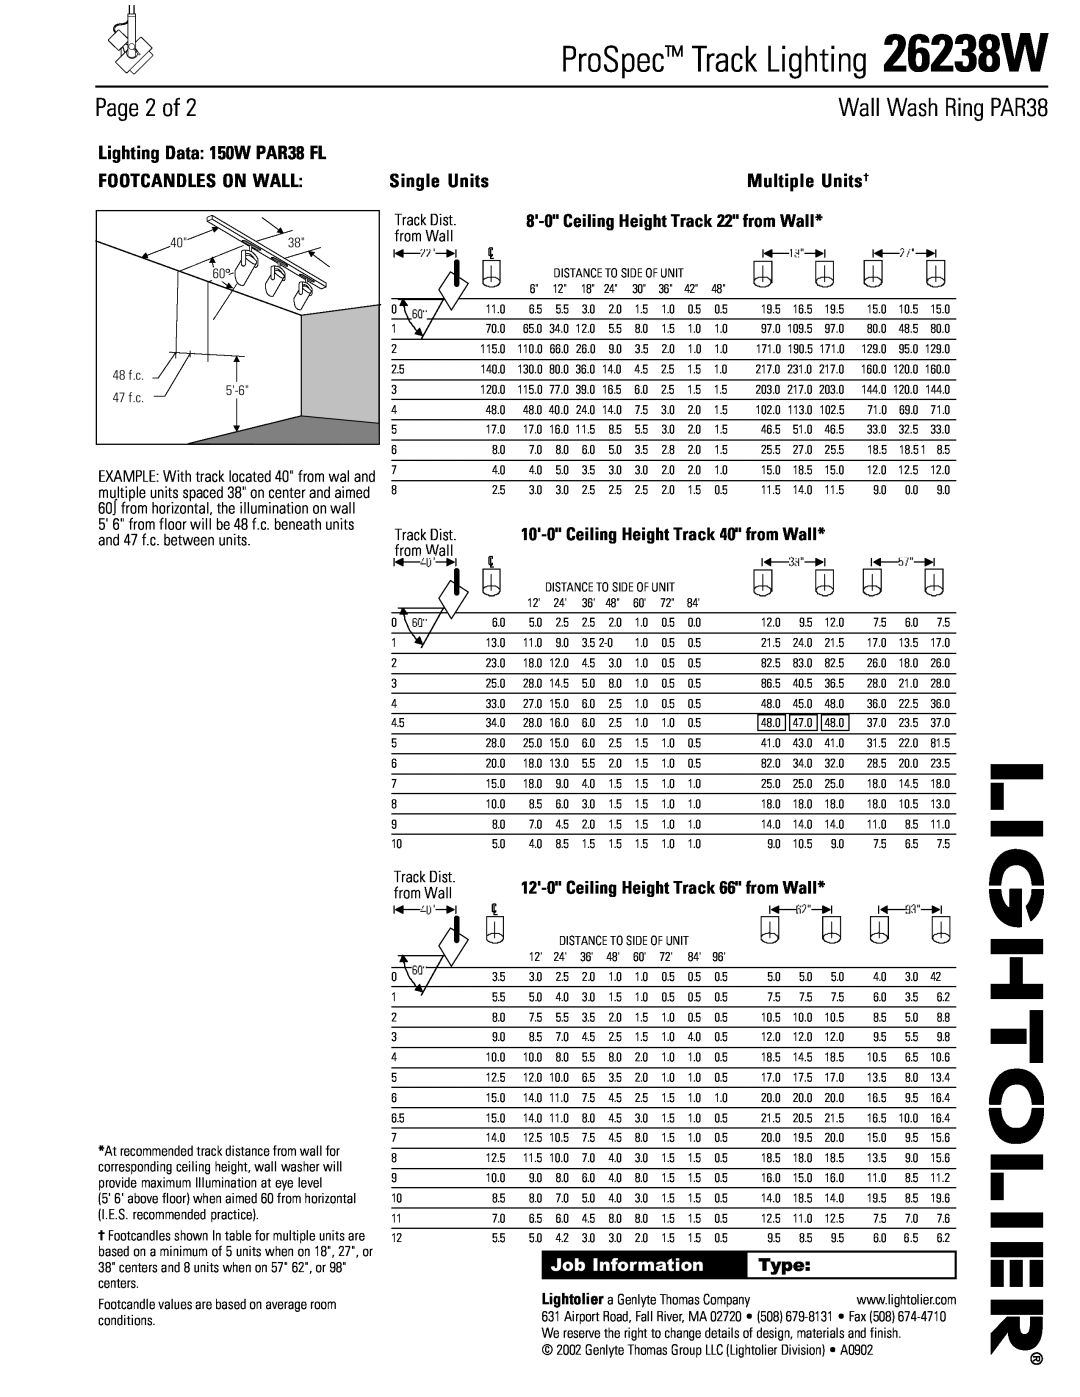 Lightolier 26238W Page 2 of, 8-0Ceiling Height Track 22 from Wall, 12-0Ceiling Height Track 66 from Wall, Single Units 